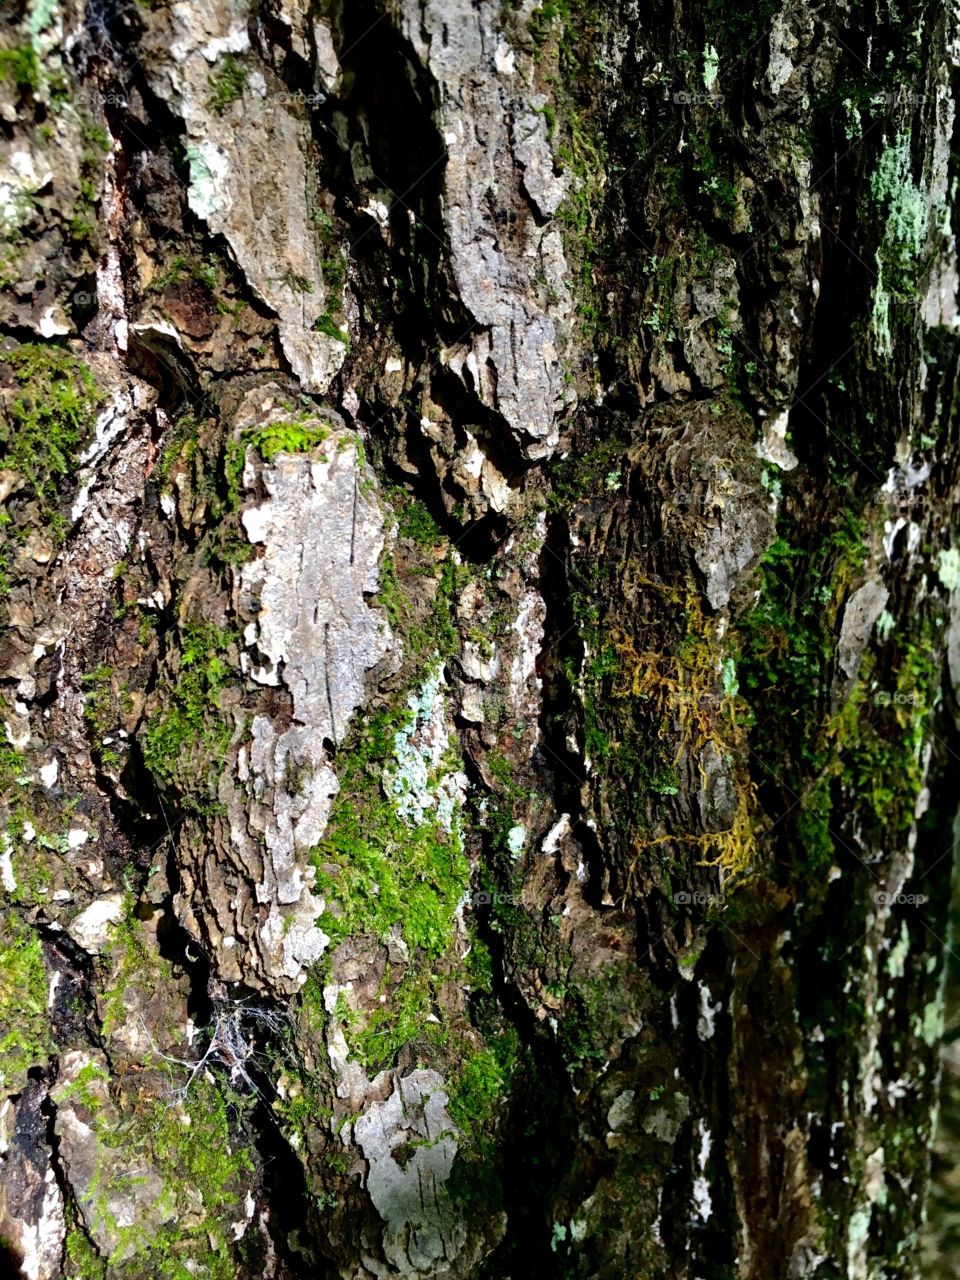 Bark and moss on a tree